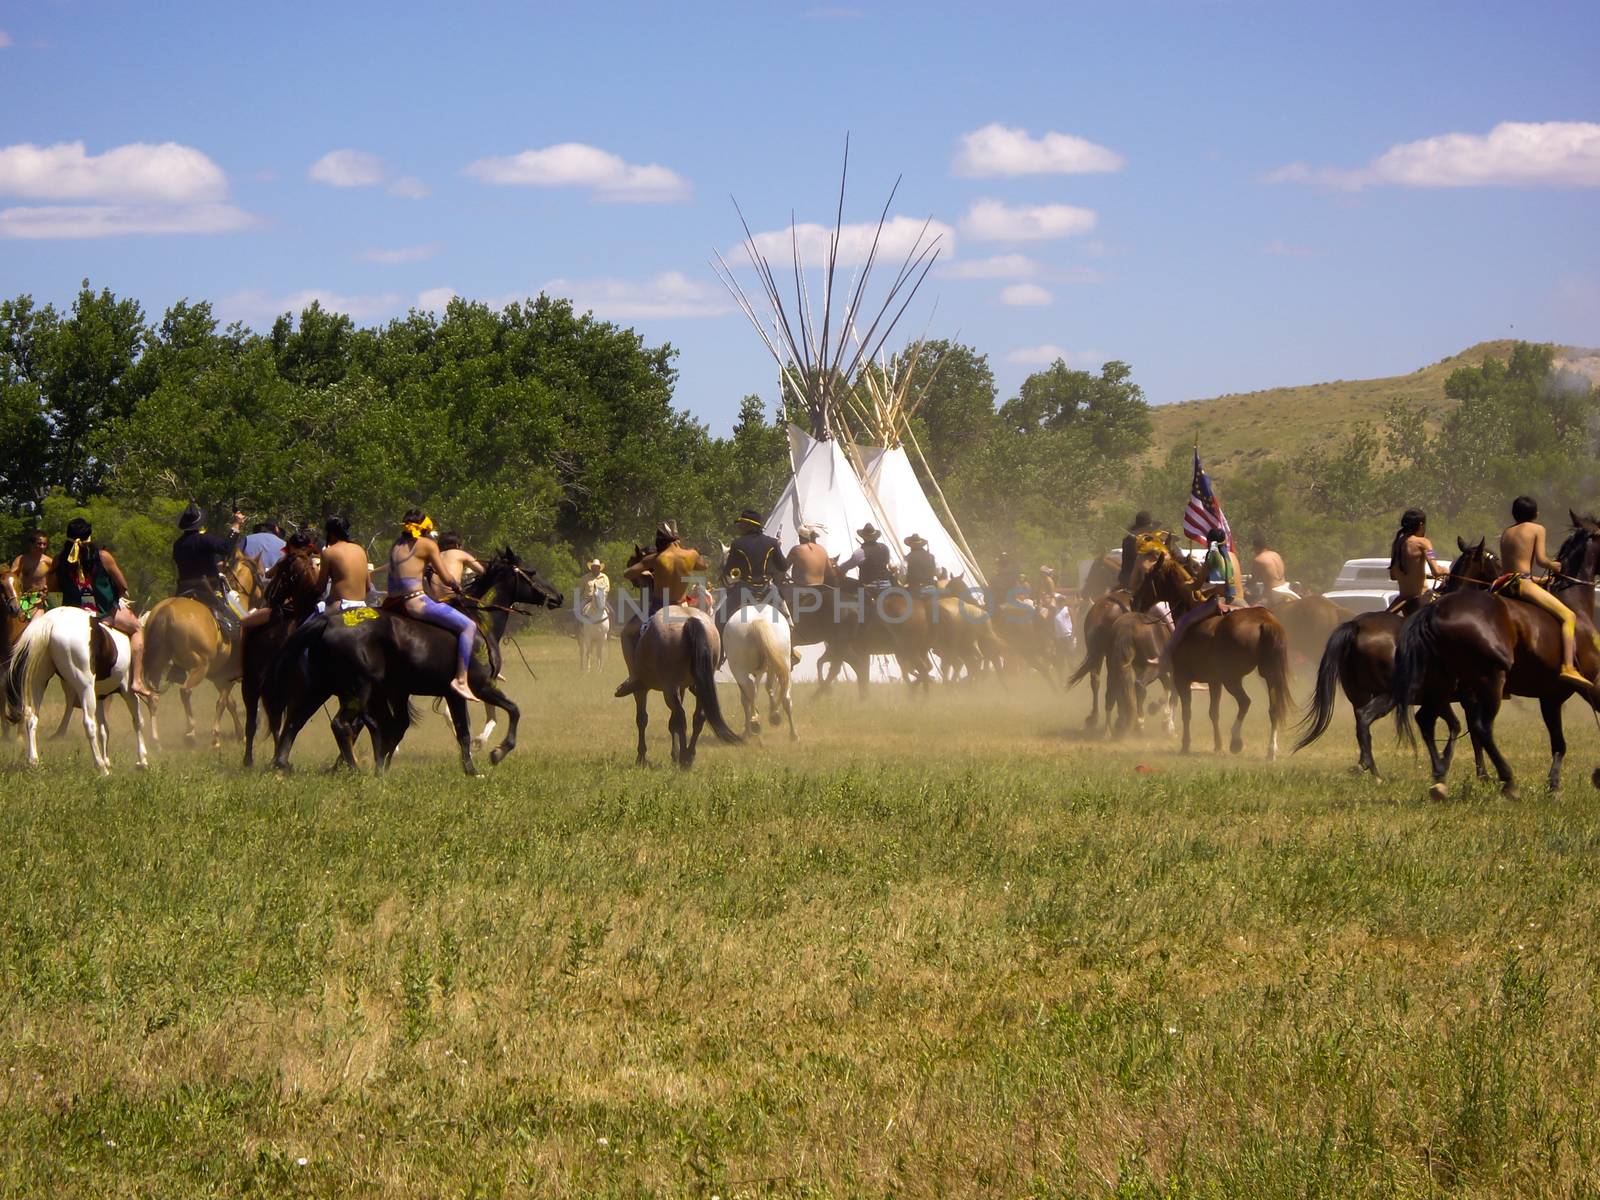 Crow Agency, Montana USA - June 27, 2009: Old and Modern worlds meet at Battle of the Little Bighorn Re-enactment. Reenactment of the Battle of the Little Bighorn known as Custer's Last Stand. Young American Indians of the Arapahoe, Cheyenne and Lakota tribes battle the U.S. 7th Cavalry soldiers.